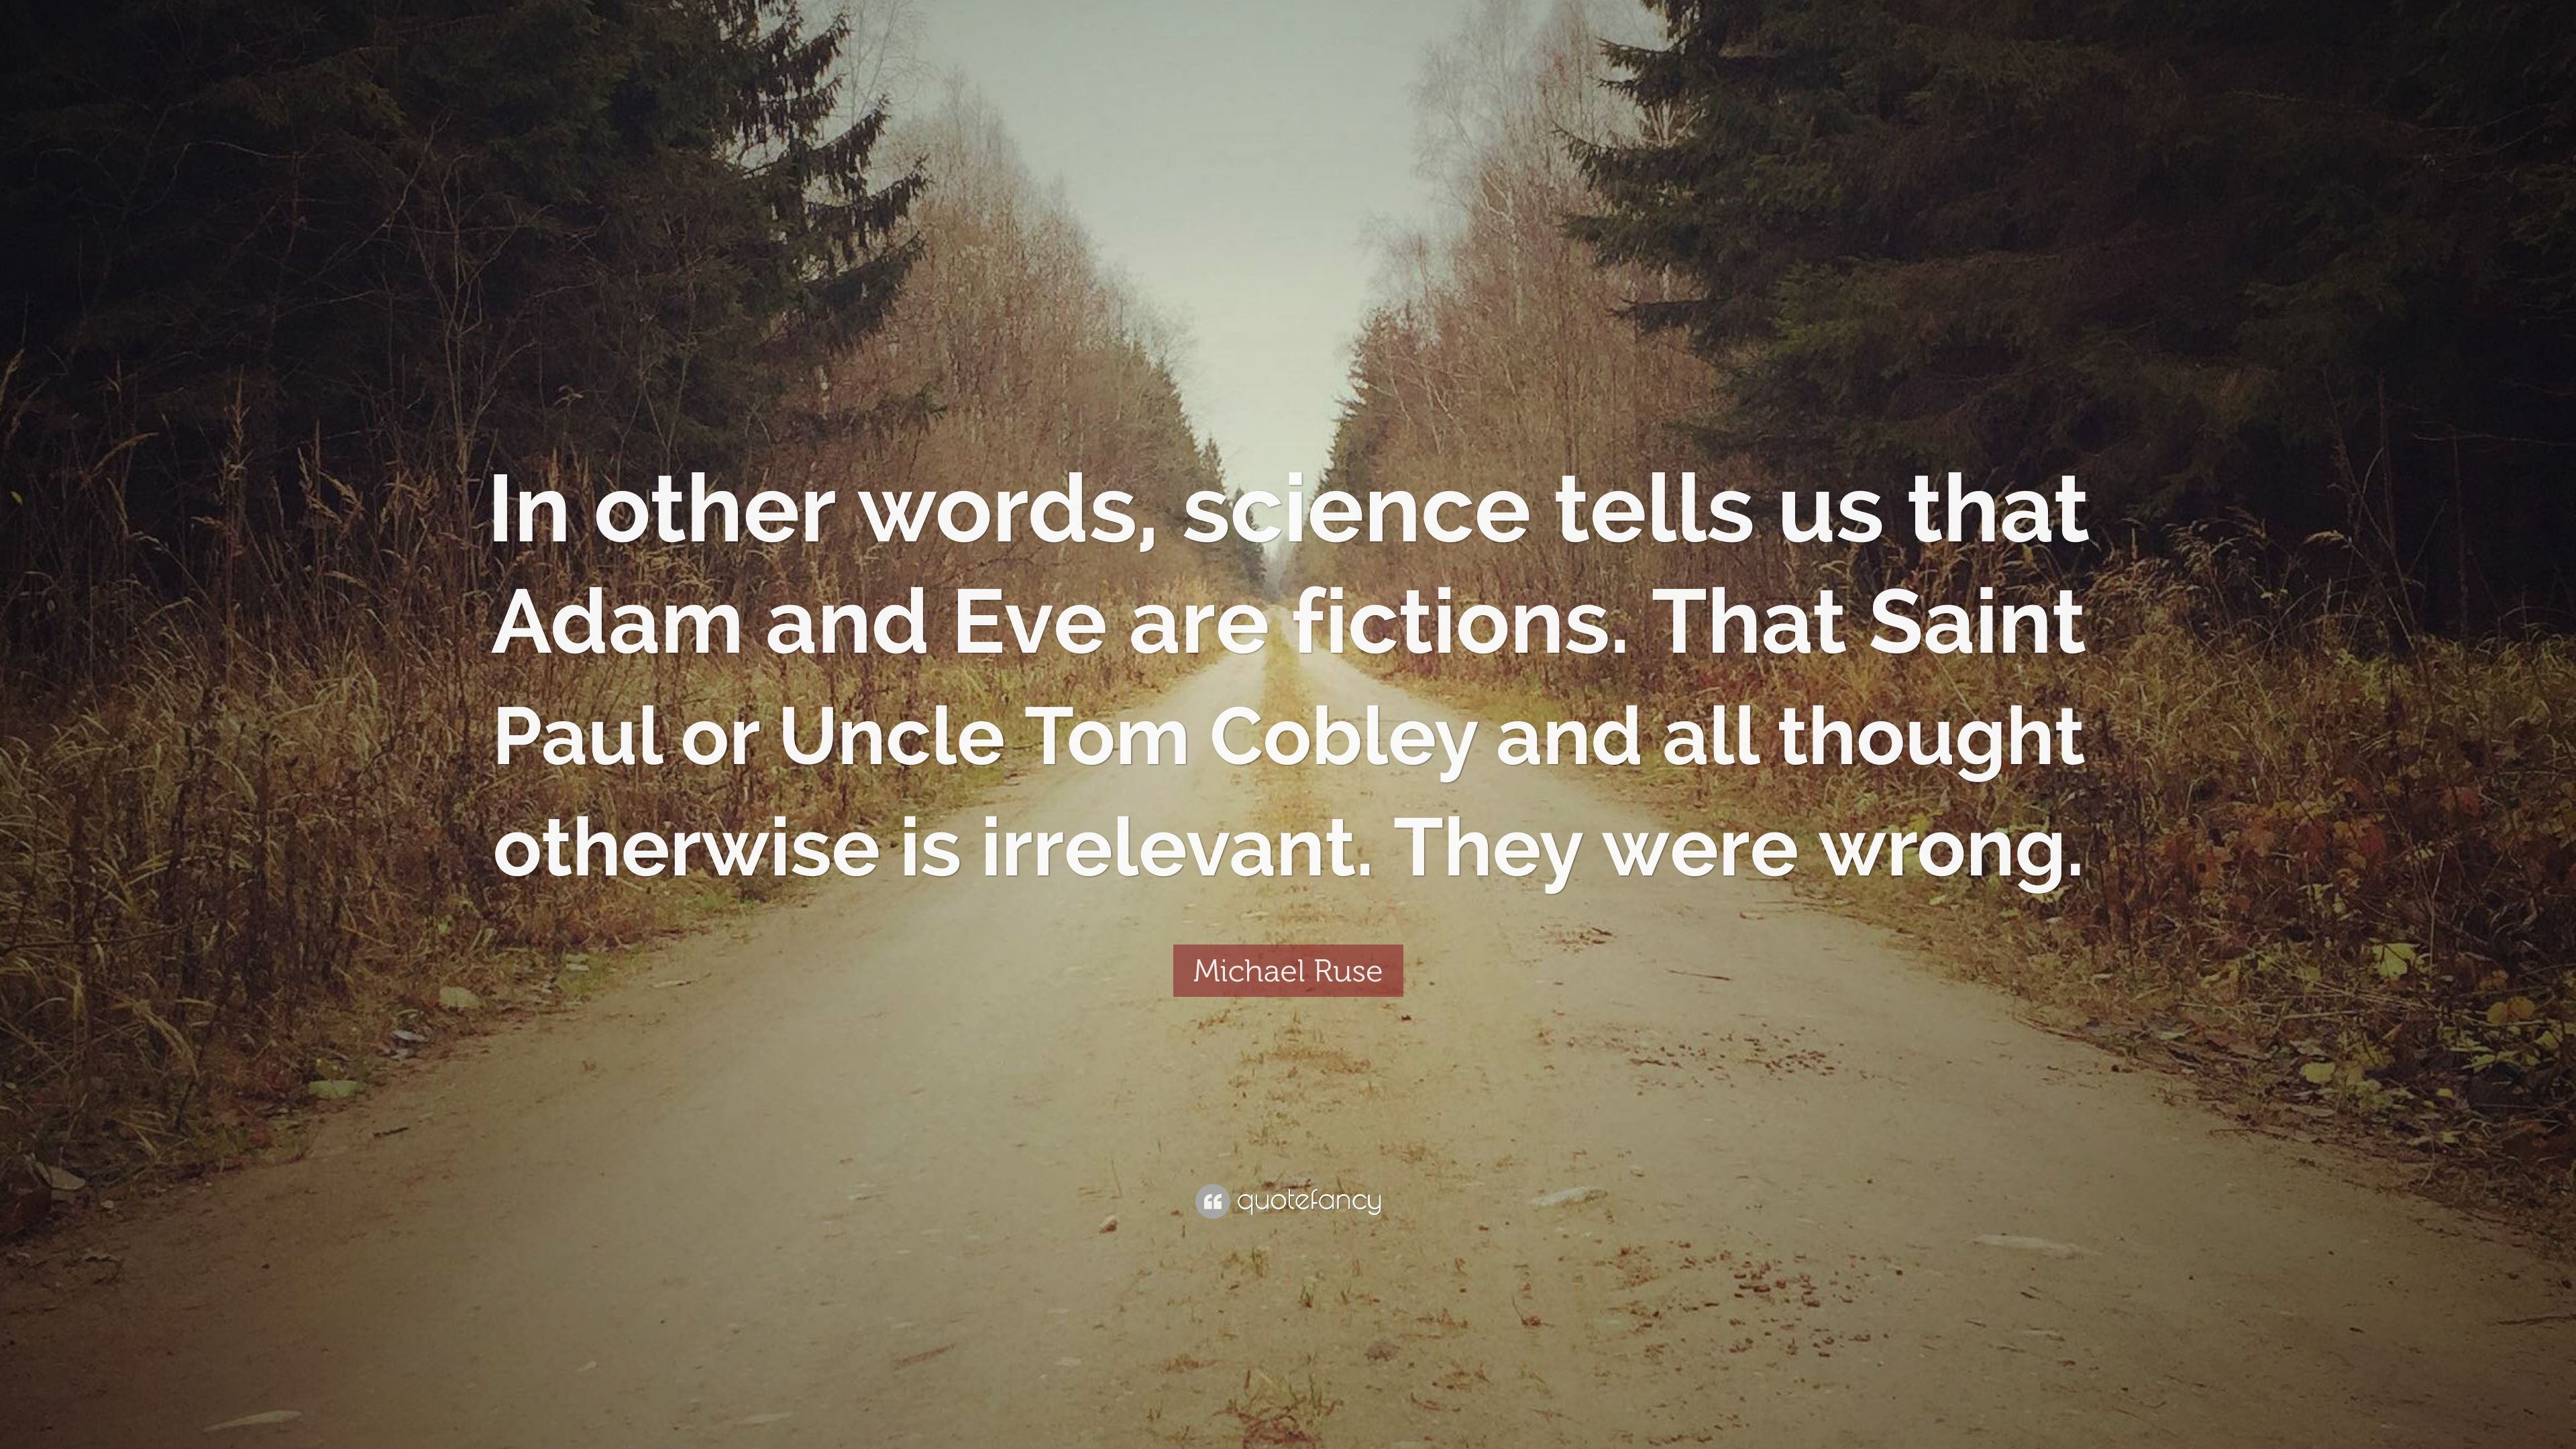 Michael Ruse Quote: “In other words, science tells us that Adam